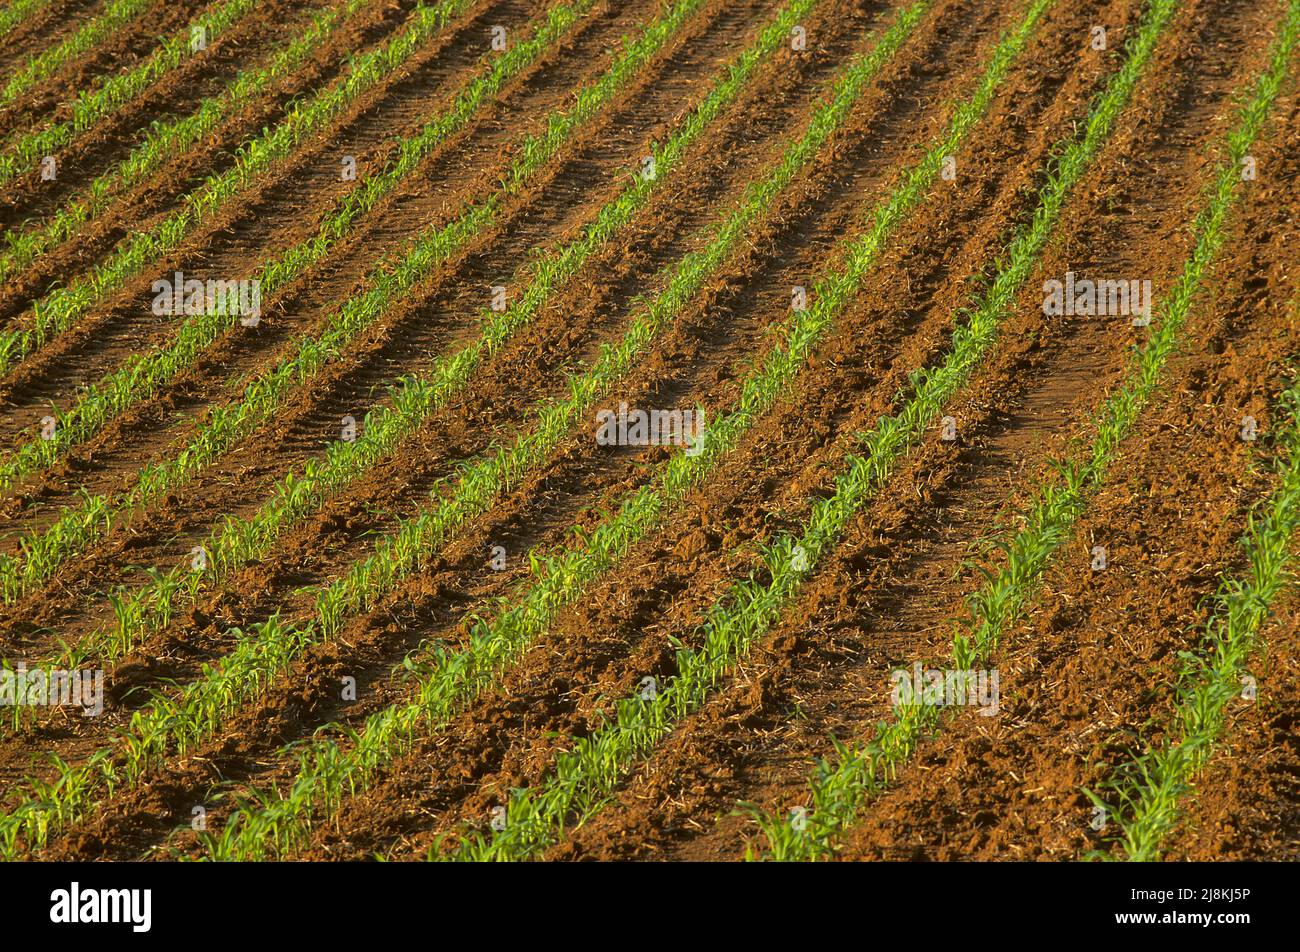 A field of young corn plants Stock Photo